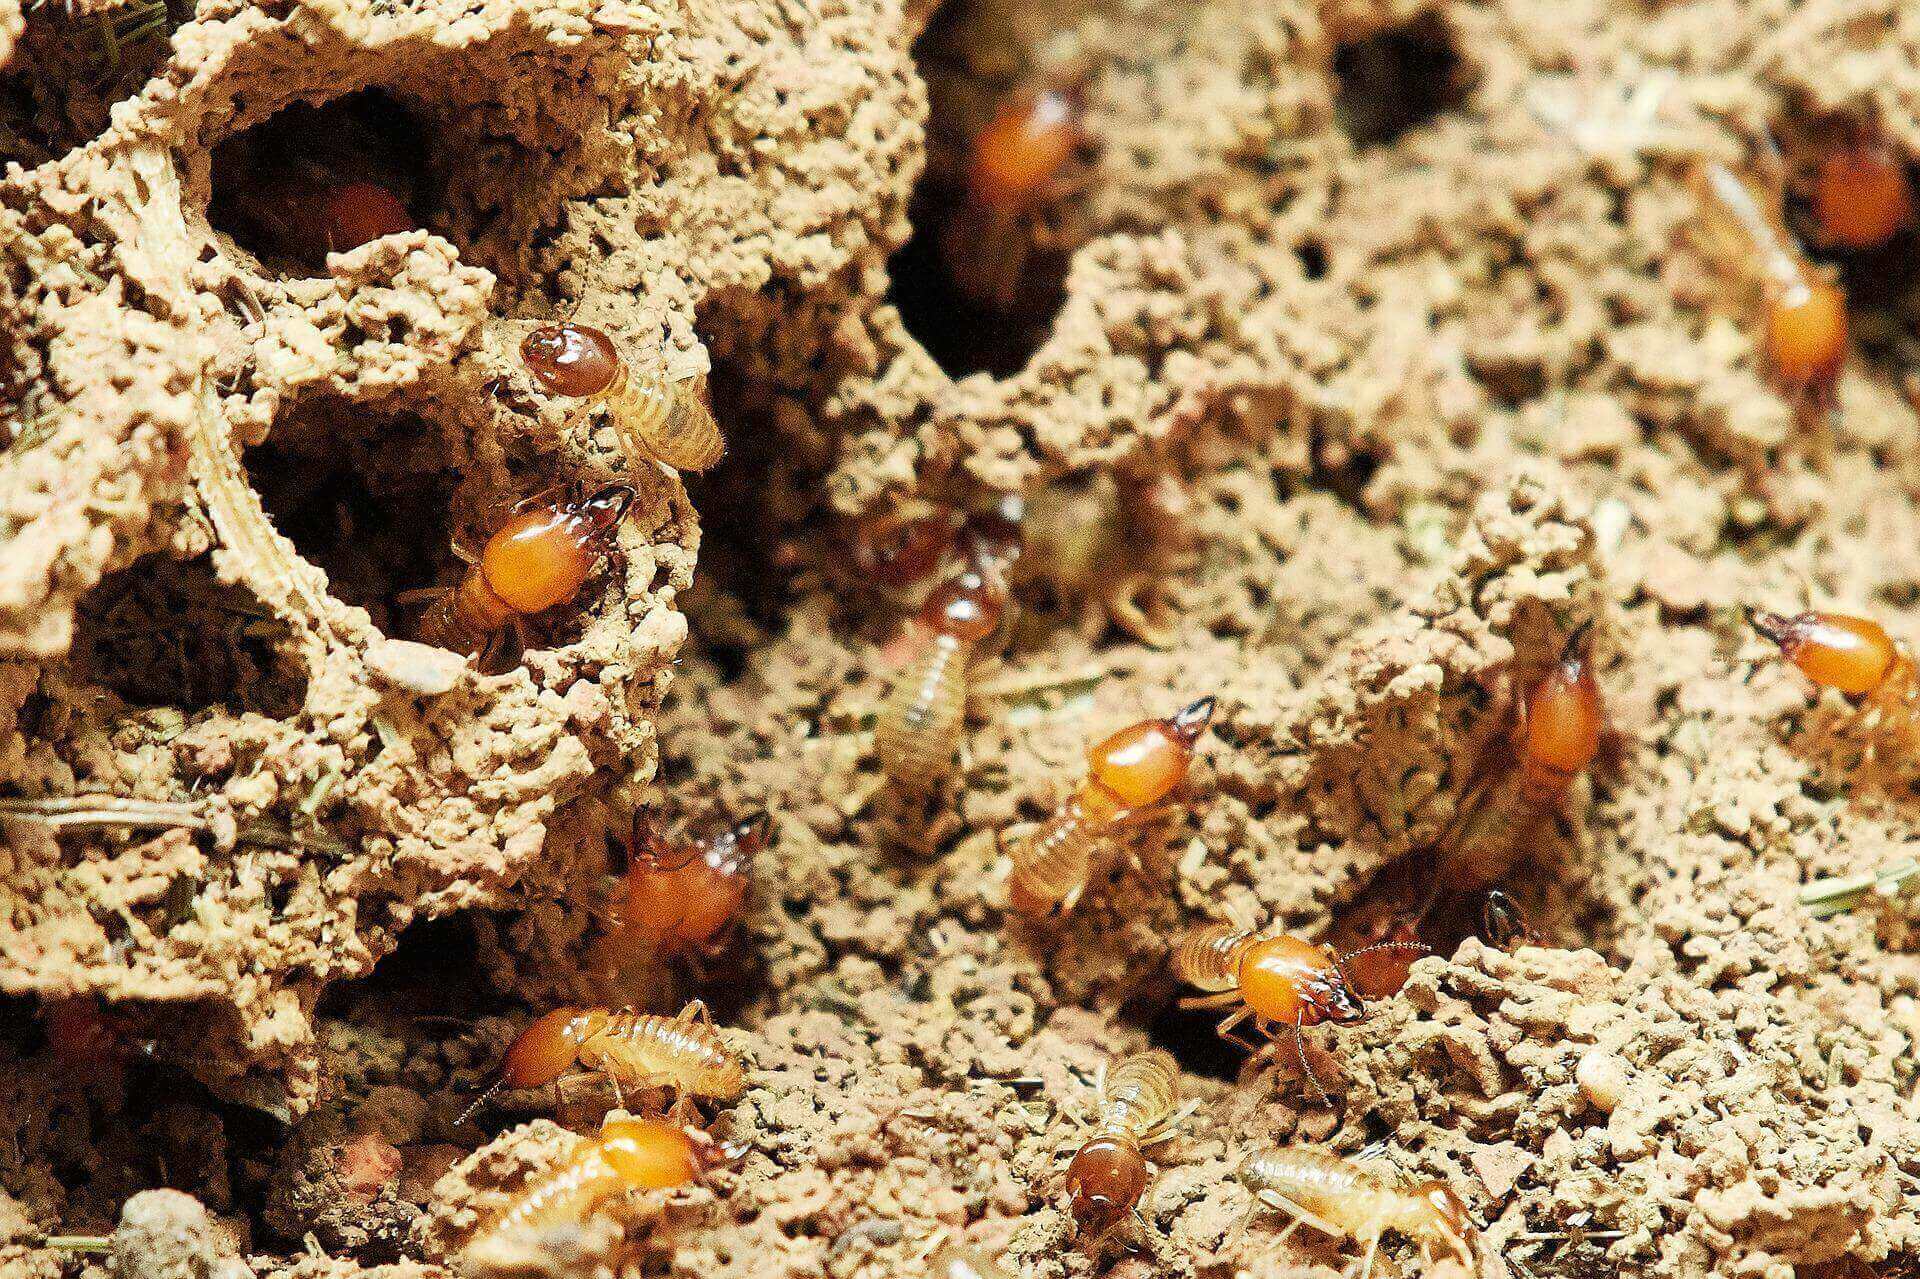 The Ultimate Guide to Termite Control in Singapore